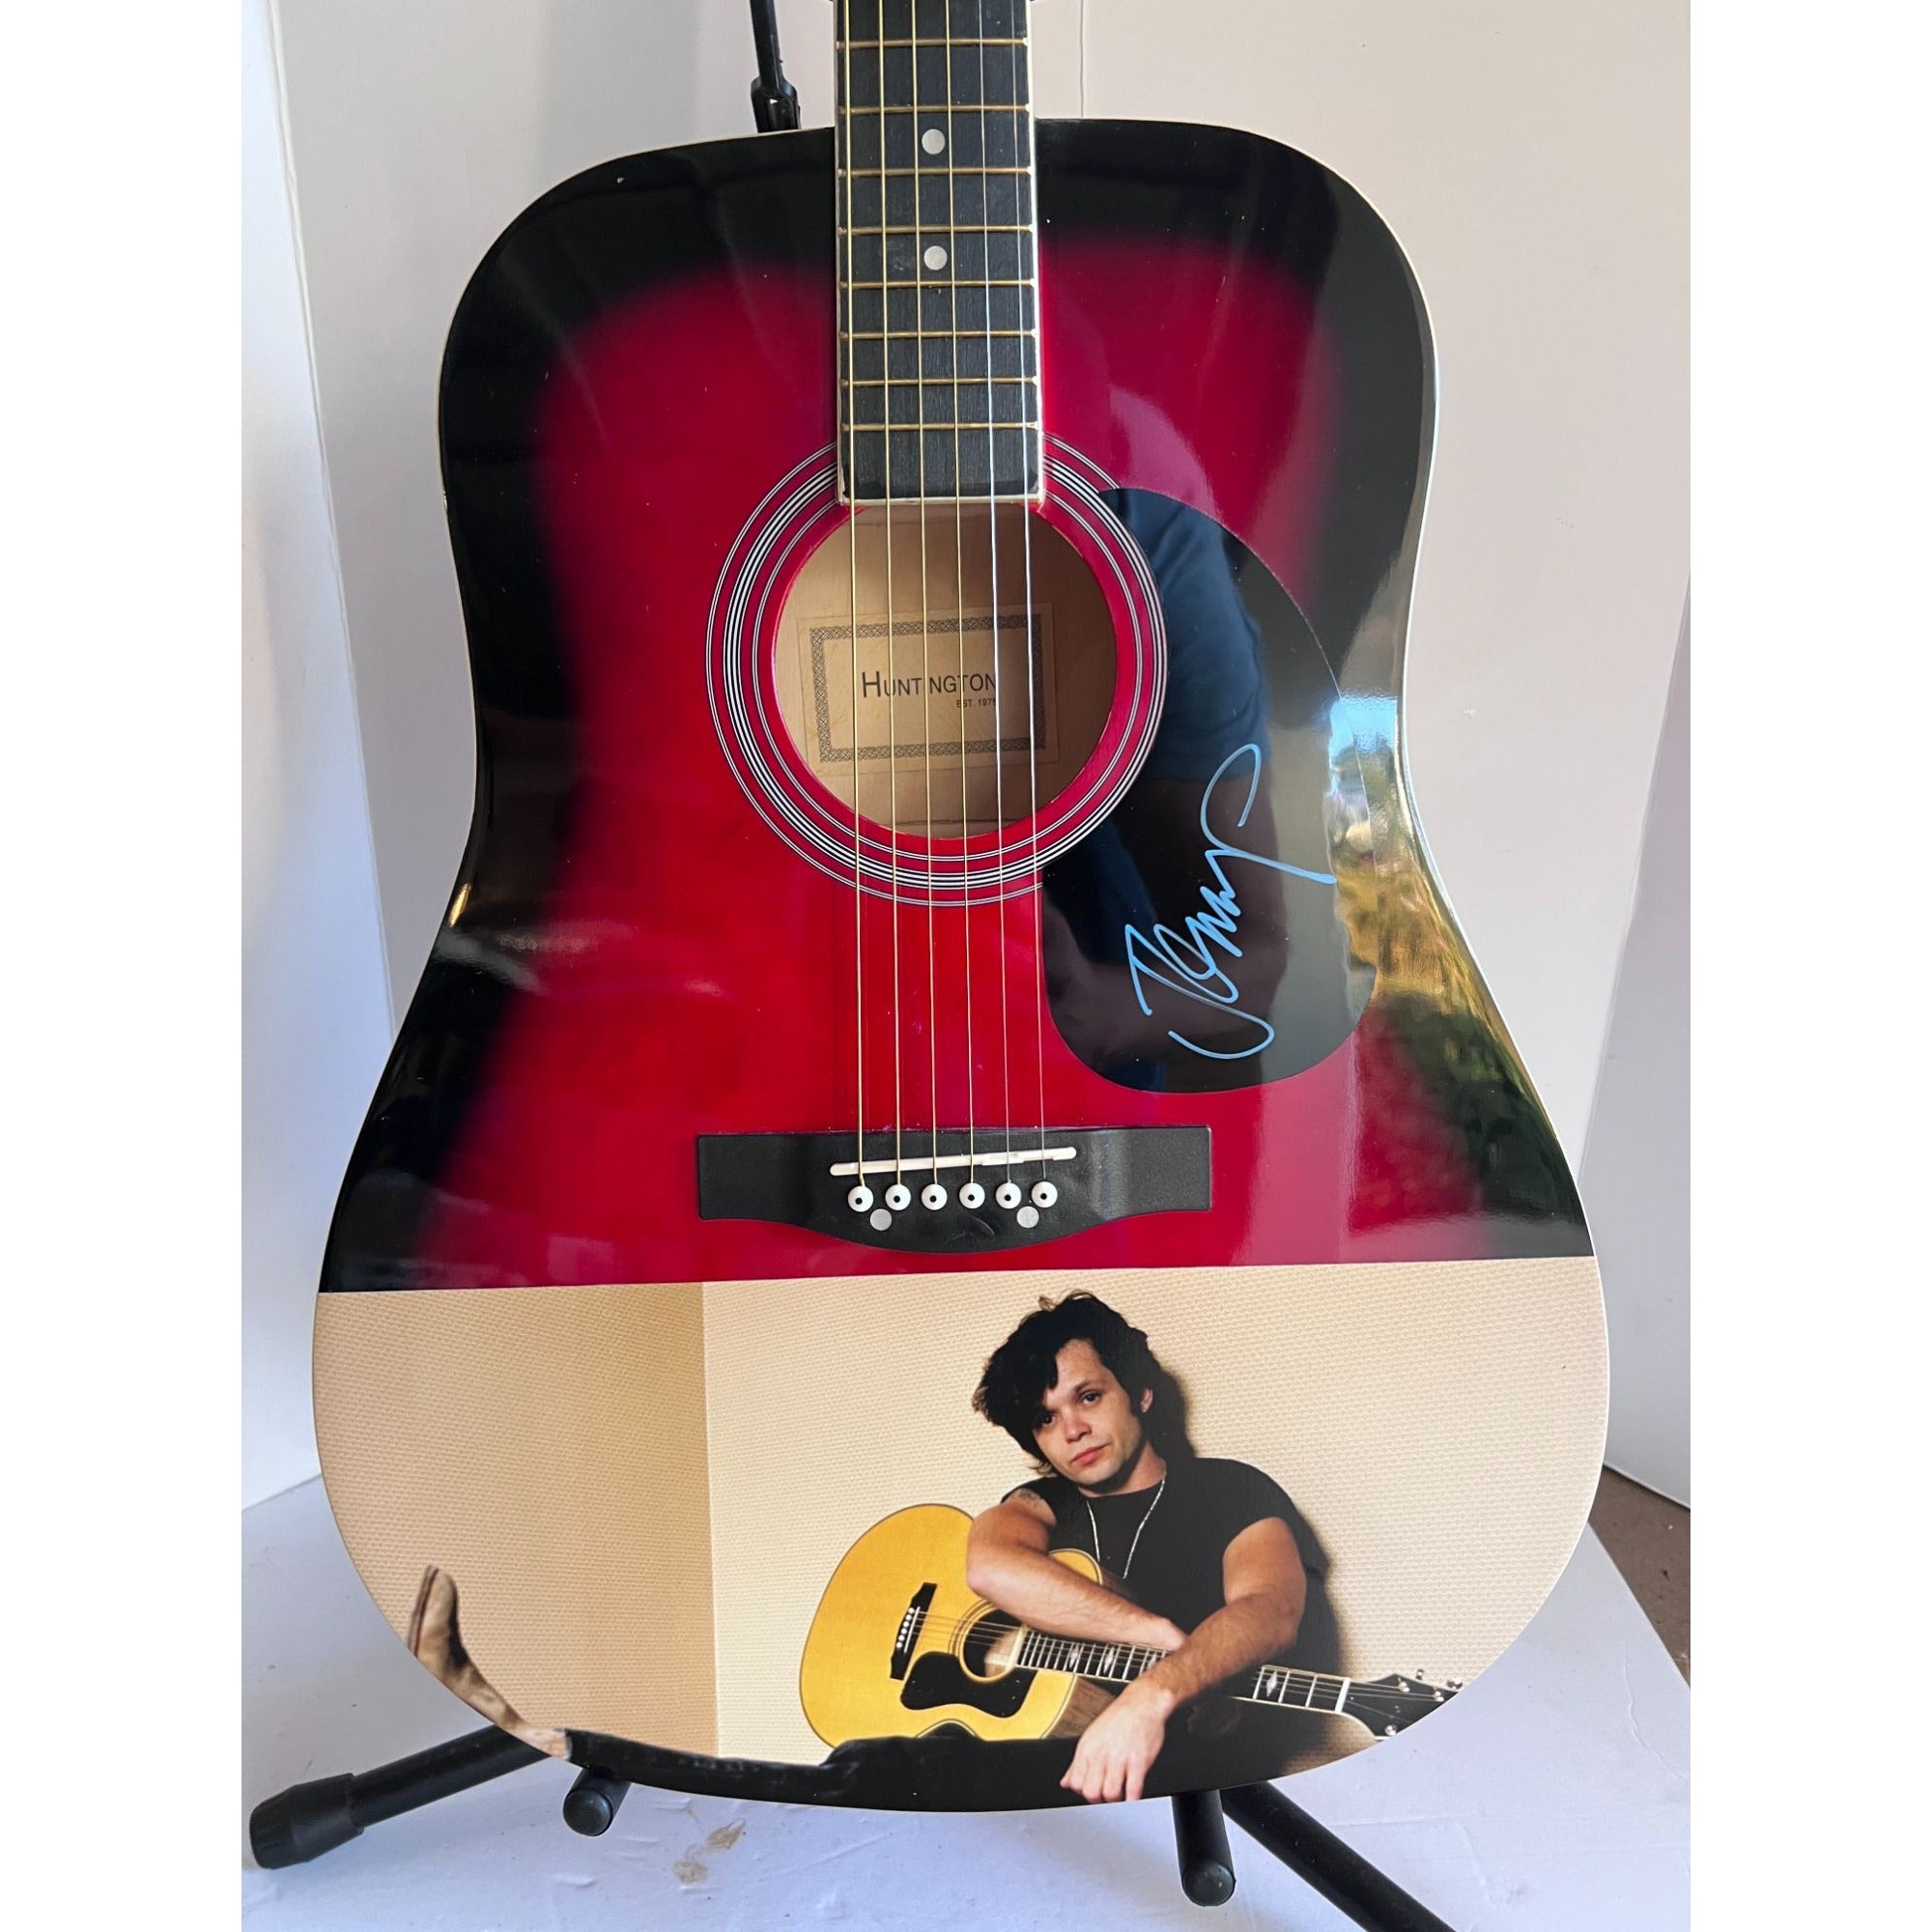 John cougar Mellercamp One of A kind 39' inch full size acoustic guitar signed